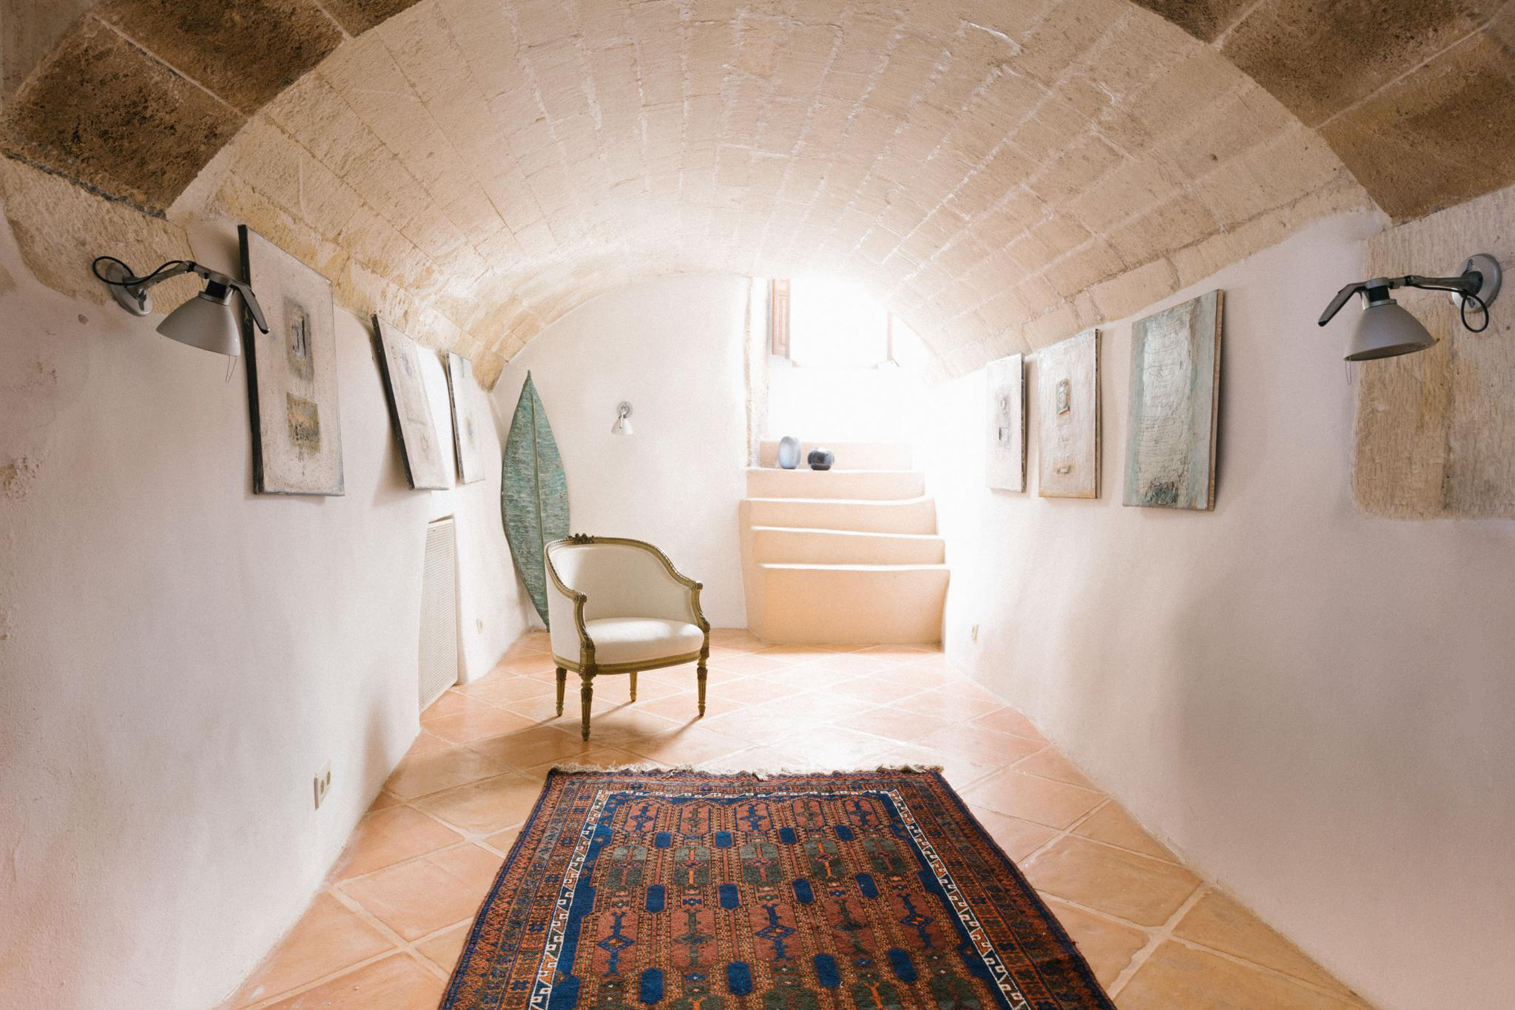 Property of the week: an art collector’s Mallorcan palazzo